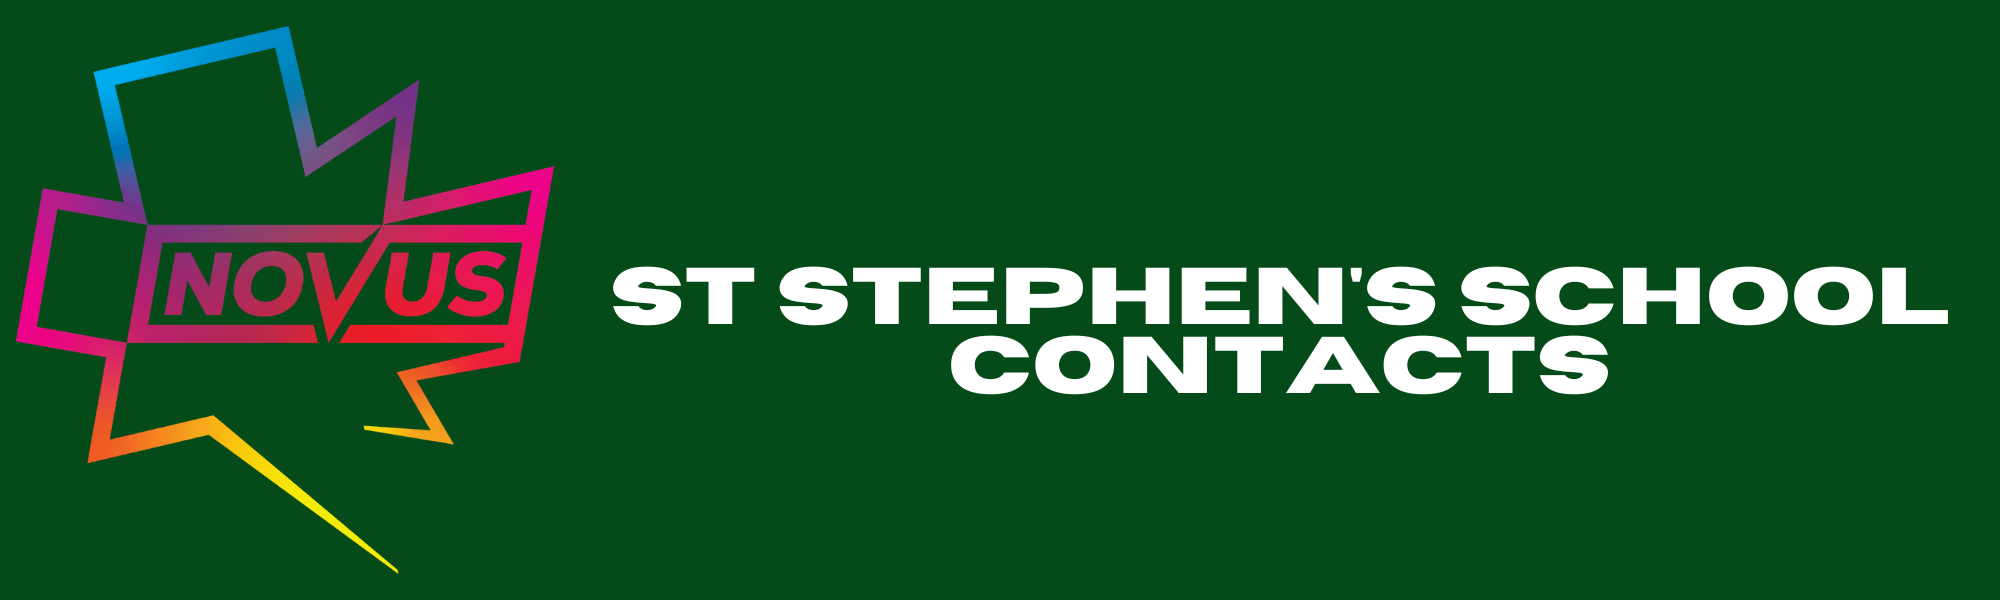 St Stephens School Contacts